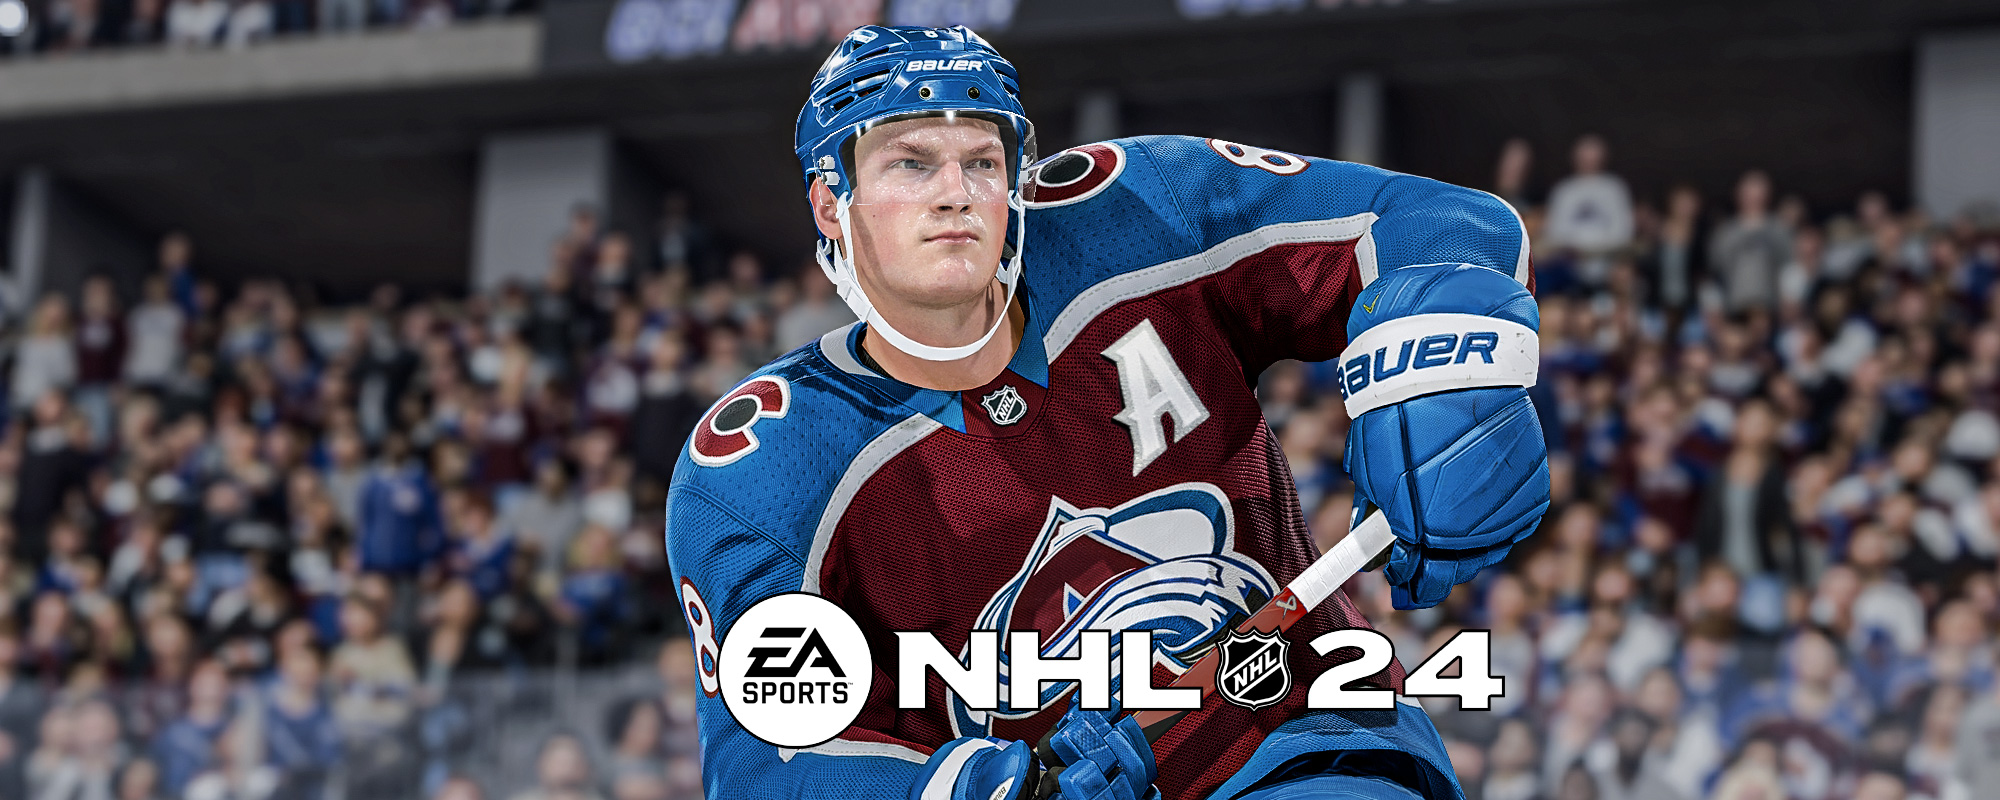 NHL 24 Fails to Deliver